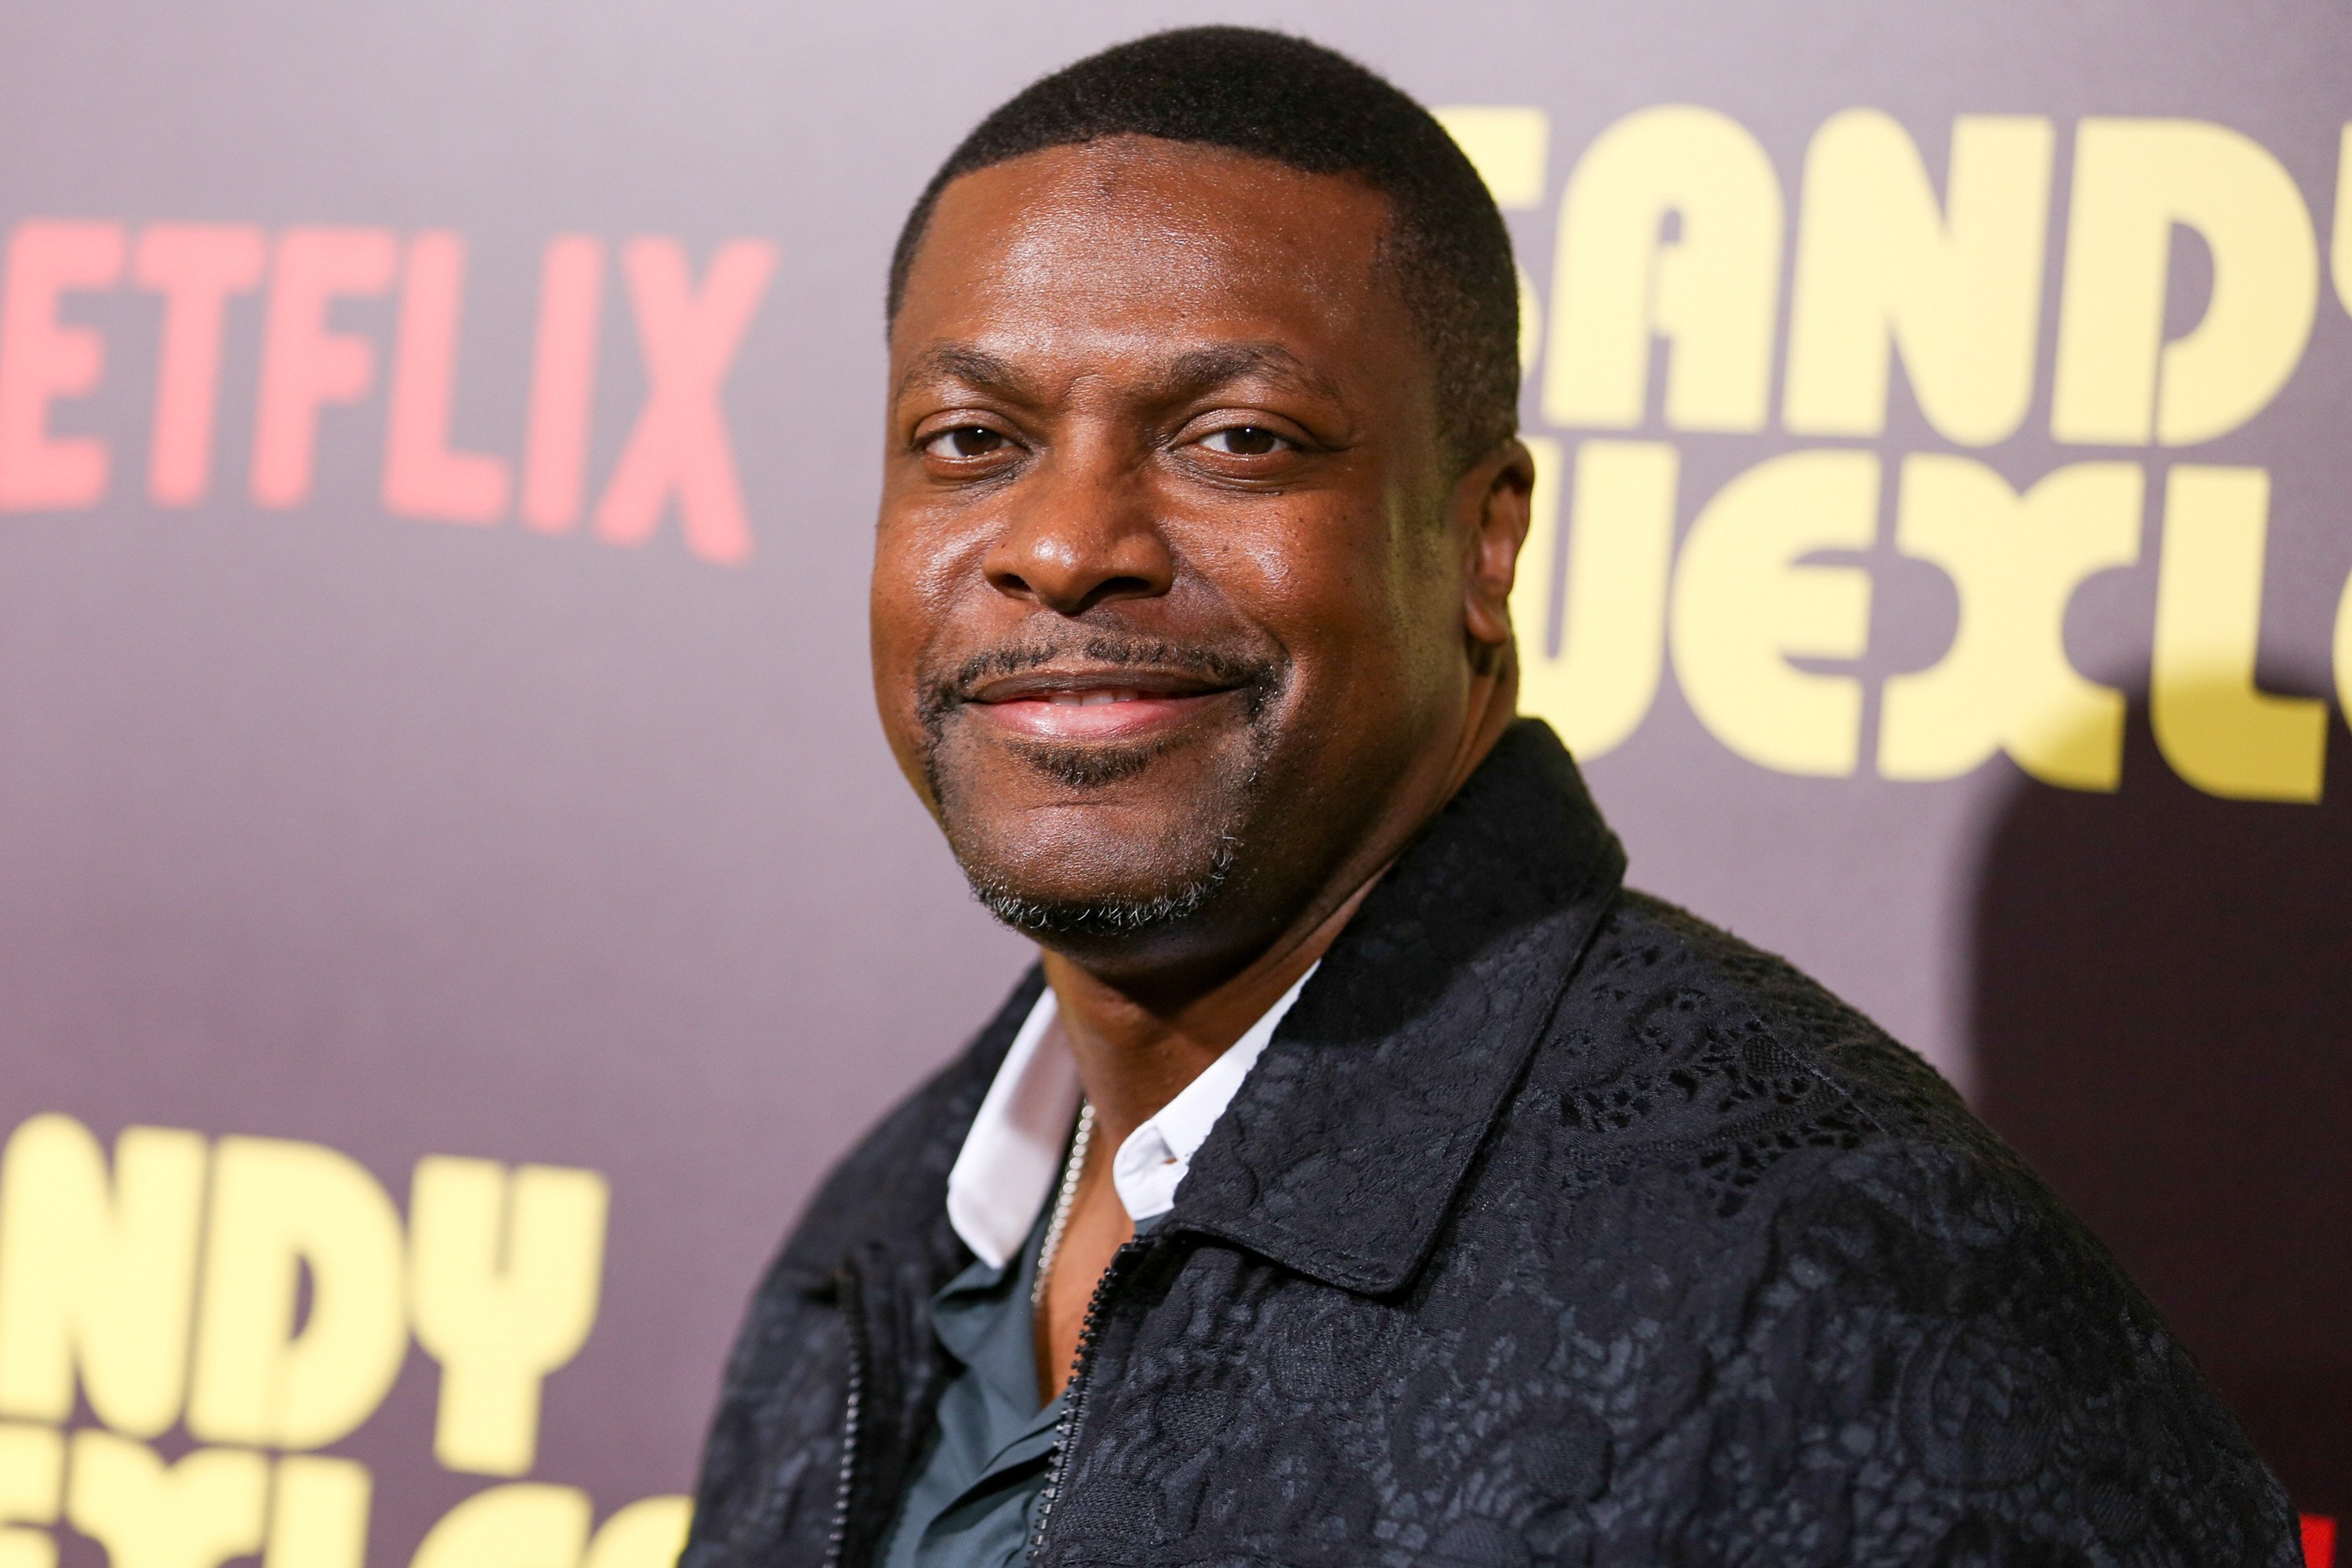 Actor Chris Tucker attends the premiere of Netflix's "Sandy Wexler" at the ArcLight Cinemas Cinerama Dome on April 6, 2017. | Photo: Getty Images